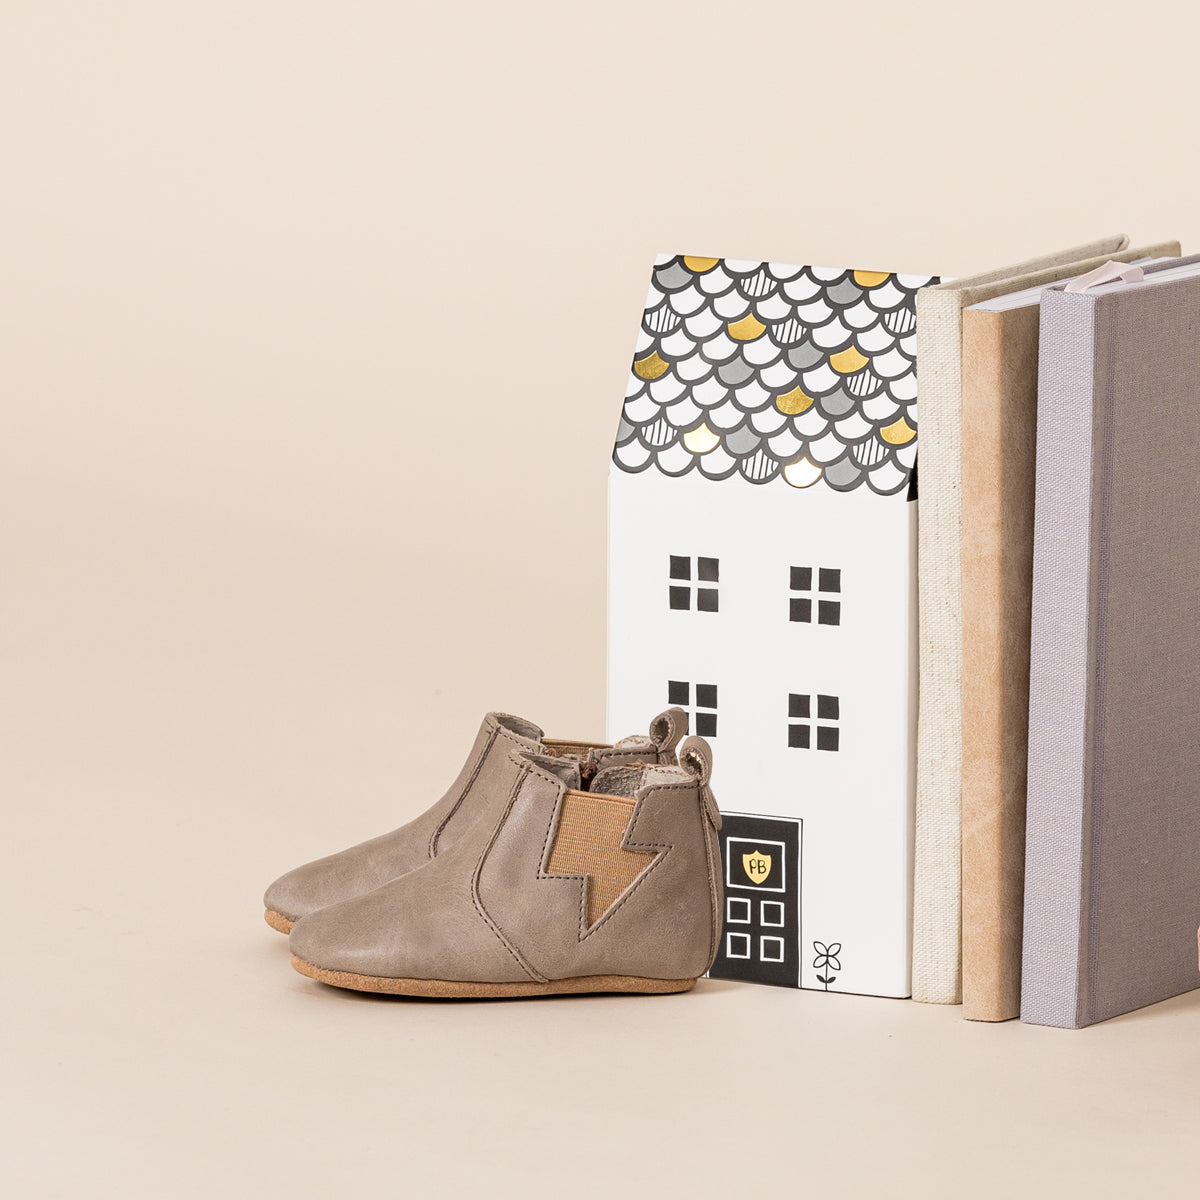 Side view of baby electric boots in colour taupe next to books and box shaped like house